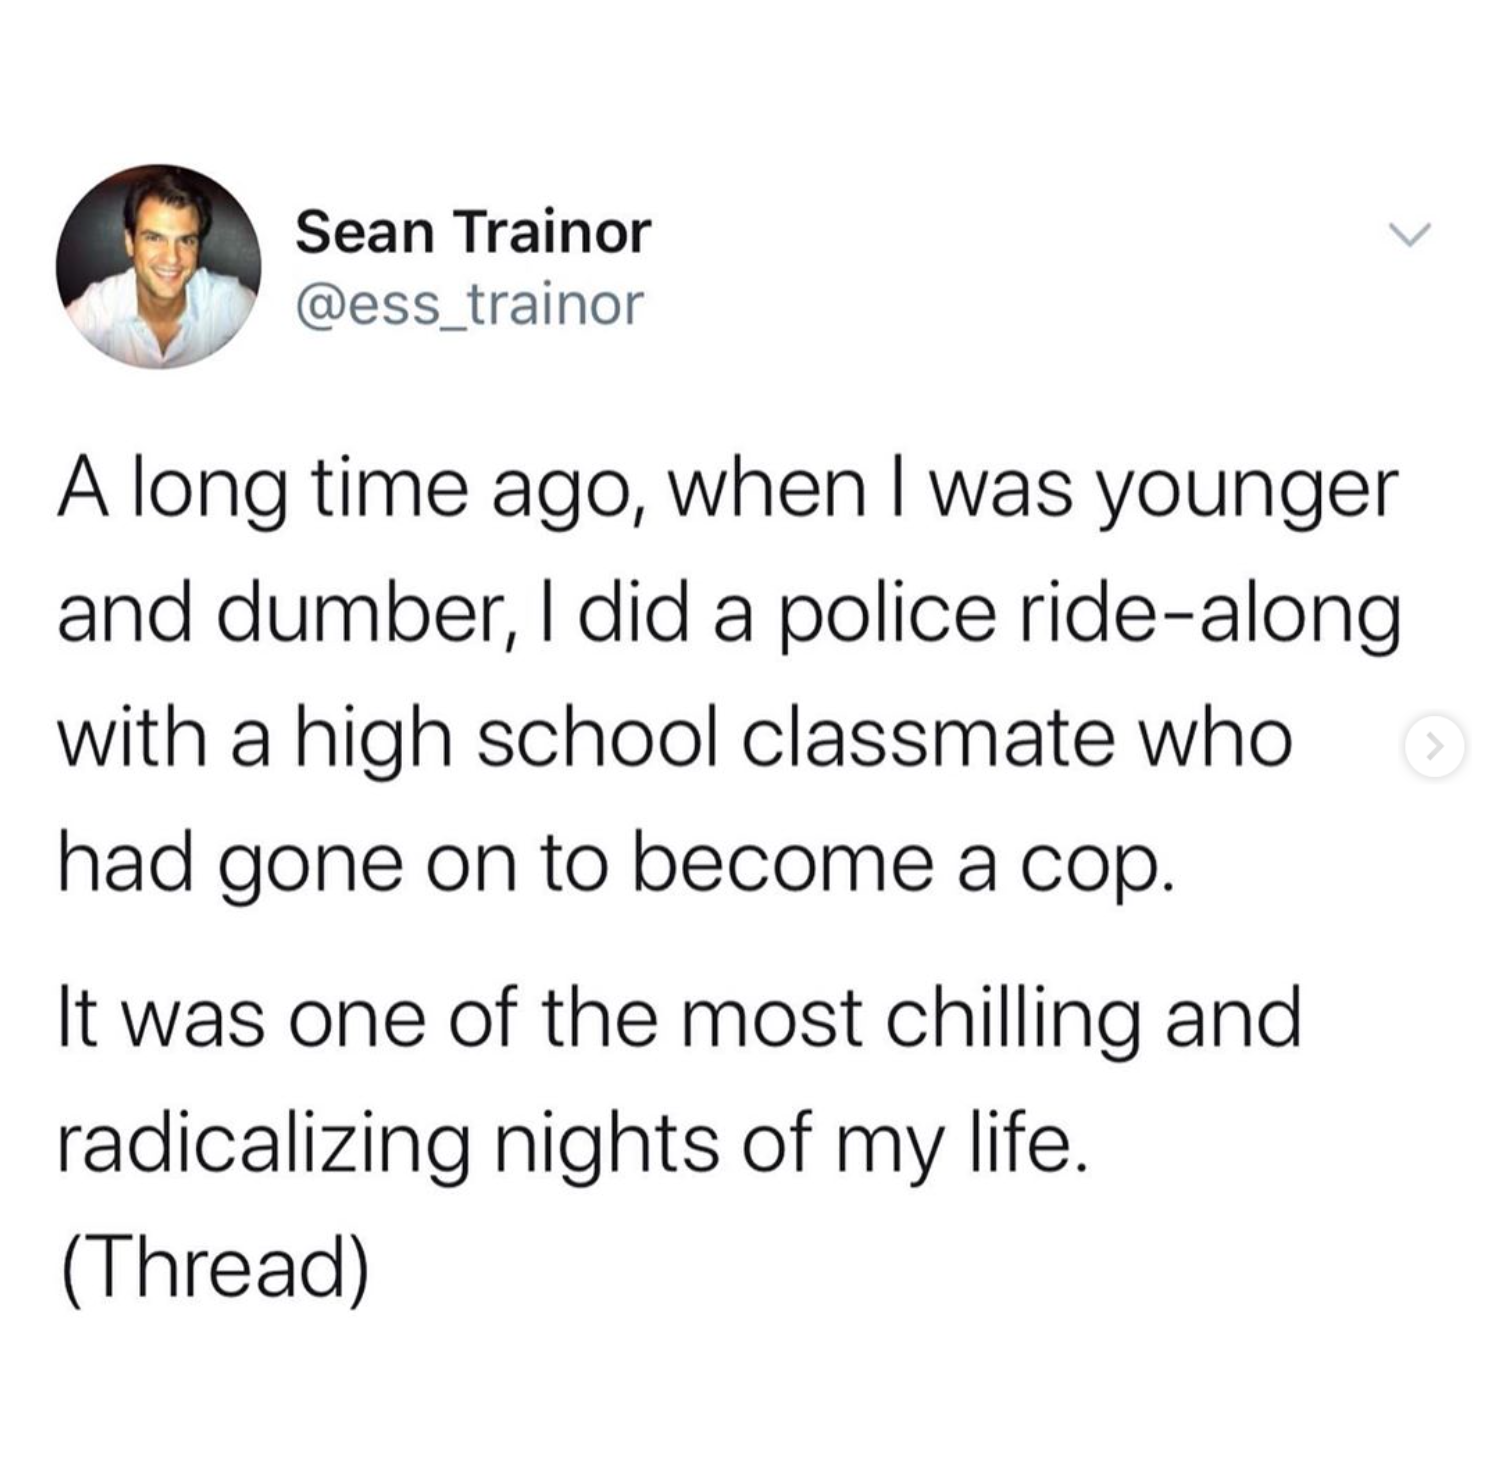 anyone who needs to hear - Sean Trainor A long time ago, when I was younger and dumber, I did a police ridealong with a high school classmate who had gone on to become a cop. It was one of the most chilling and radicalizing nights of my life. Thread